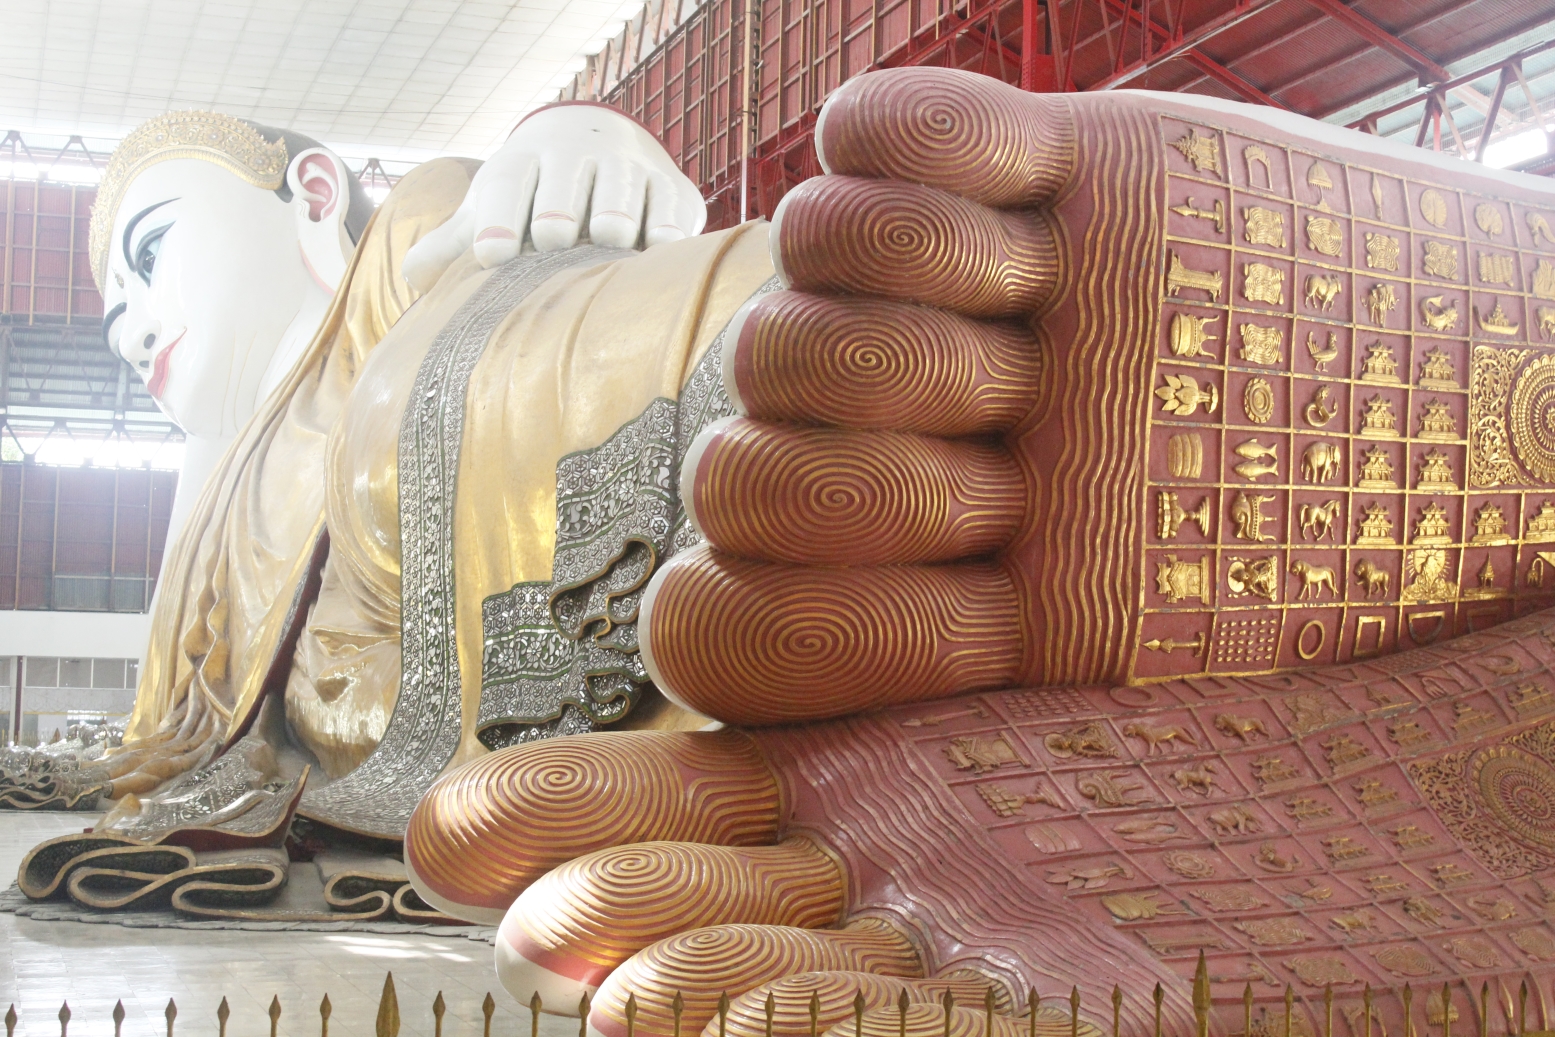 Travelling Homebody - Your 24 hour guide to Yangon - Reclining Buddha